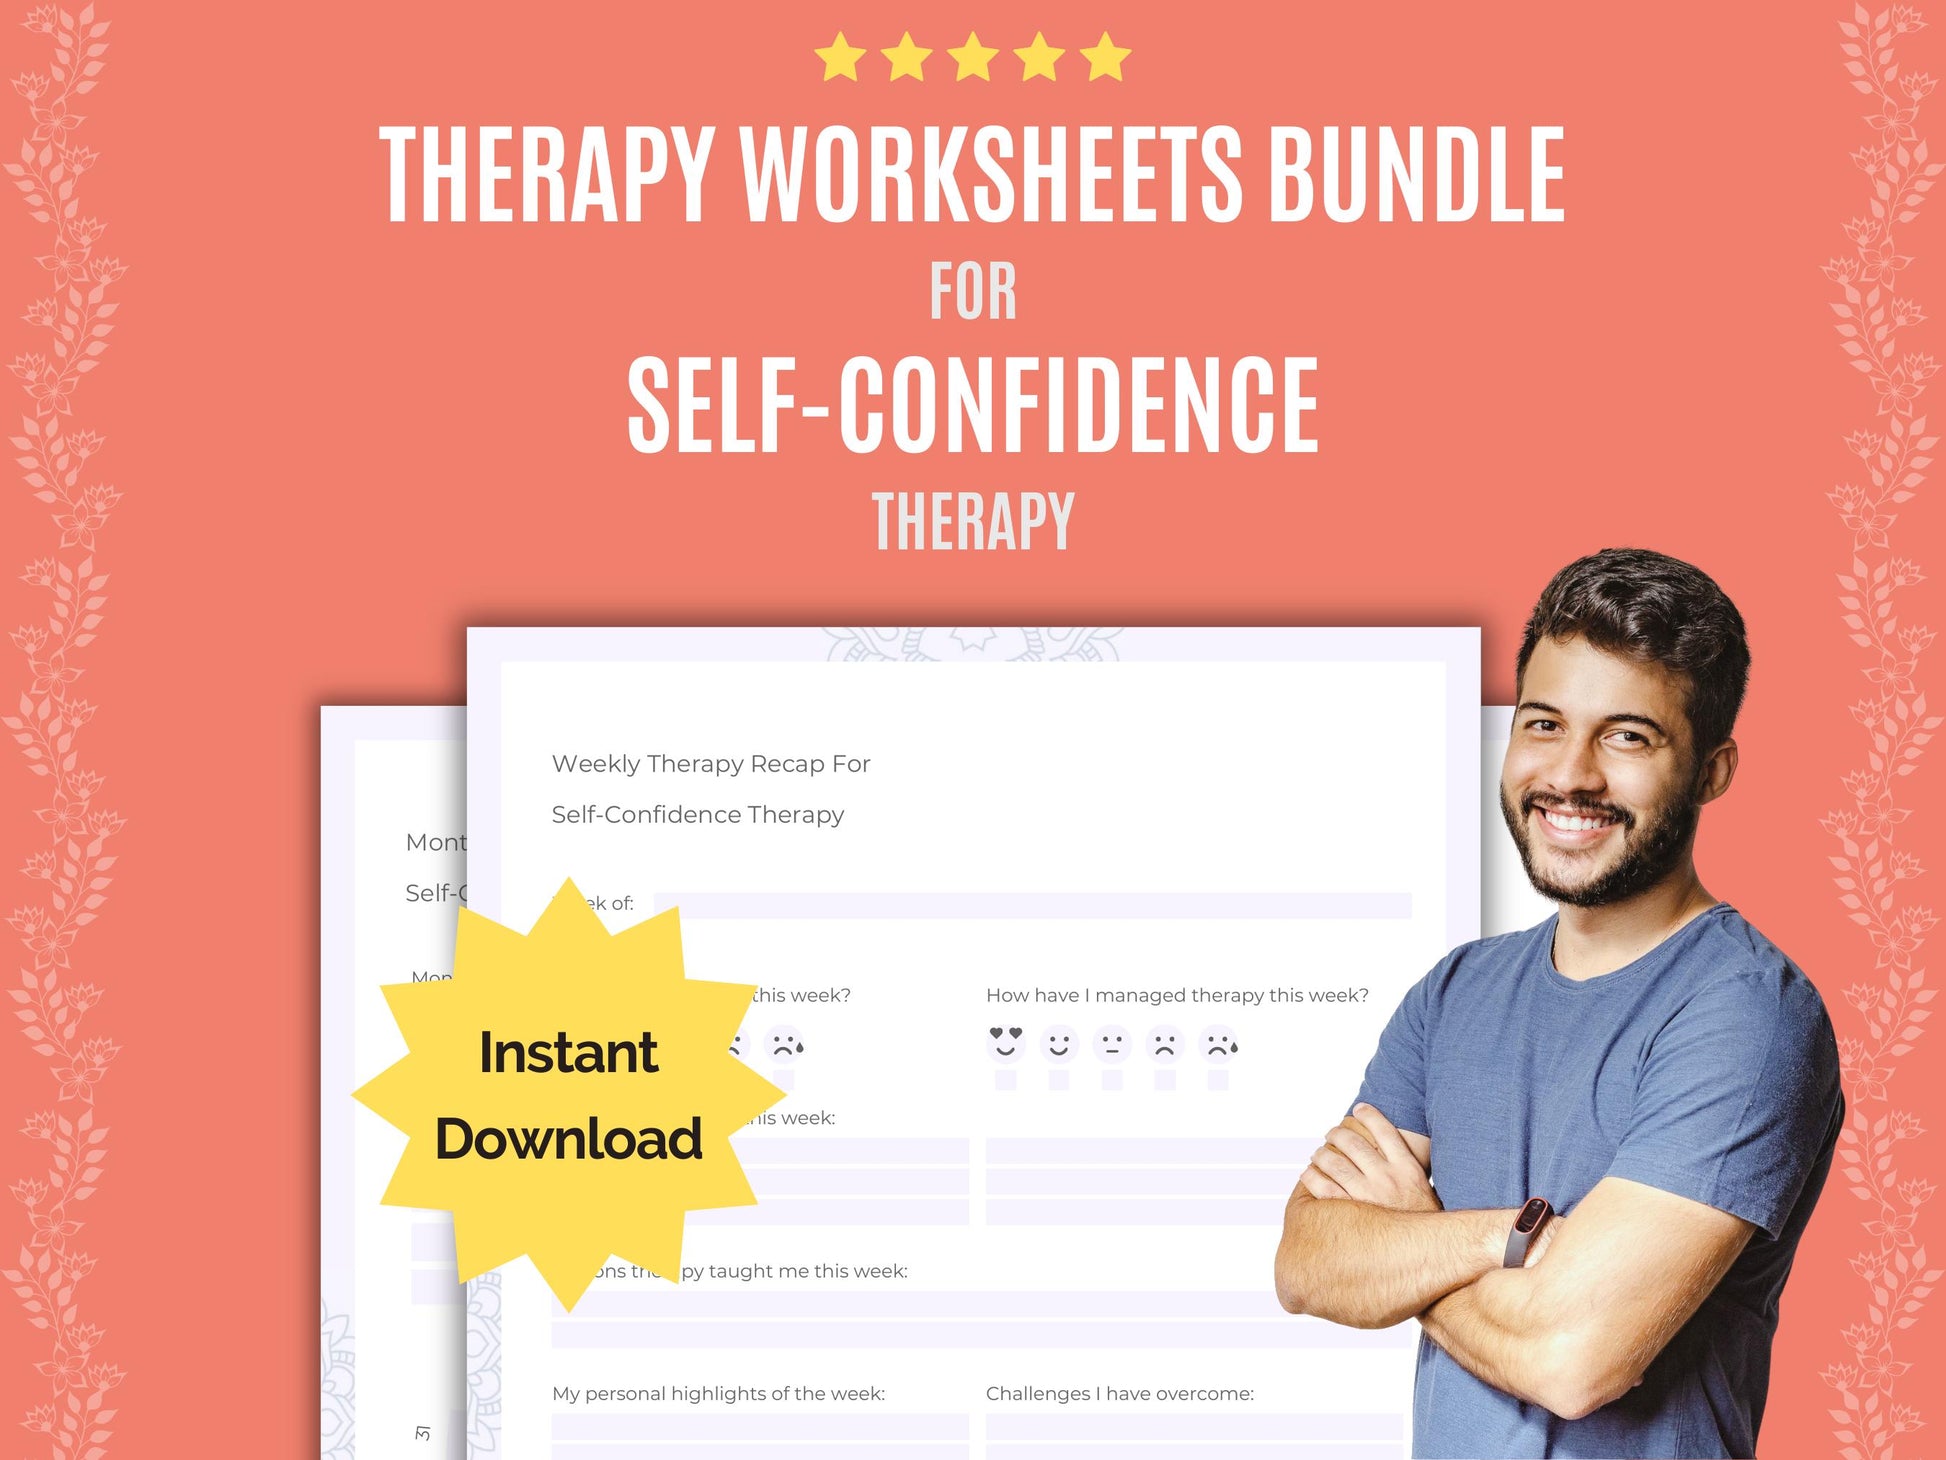 Goal Setting, Journaling, Journals, Workbooks, Notes, Tools, Resources, Counseling, Therapy, Planners, Self-Confidence Therapy, Cheat Sheet, Templates